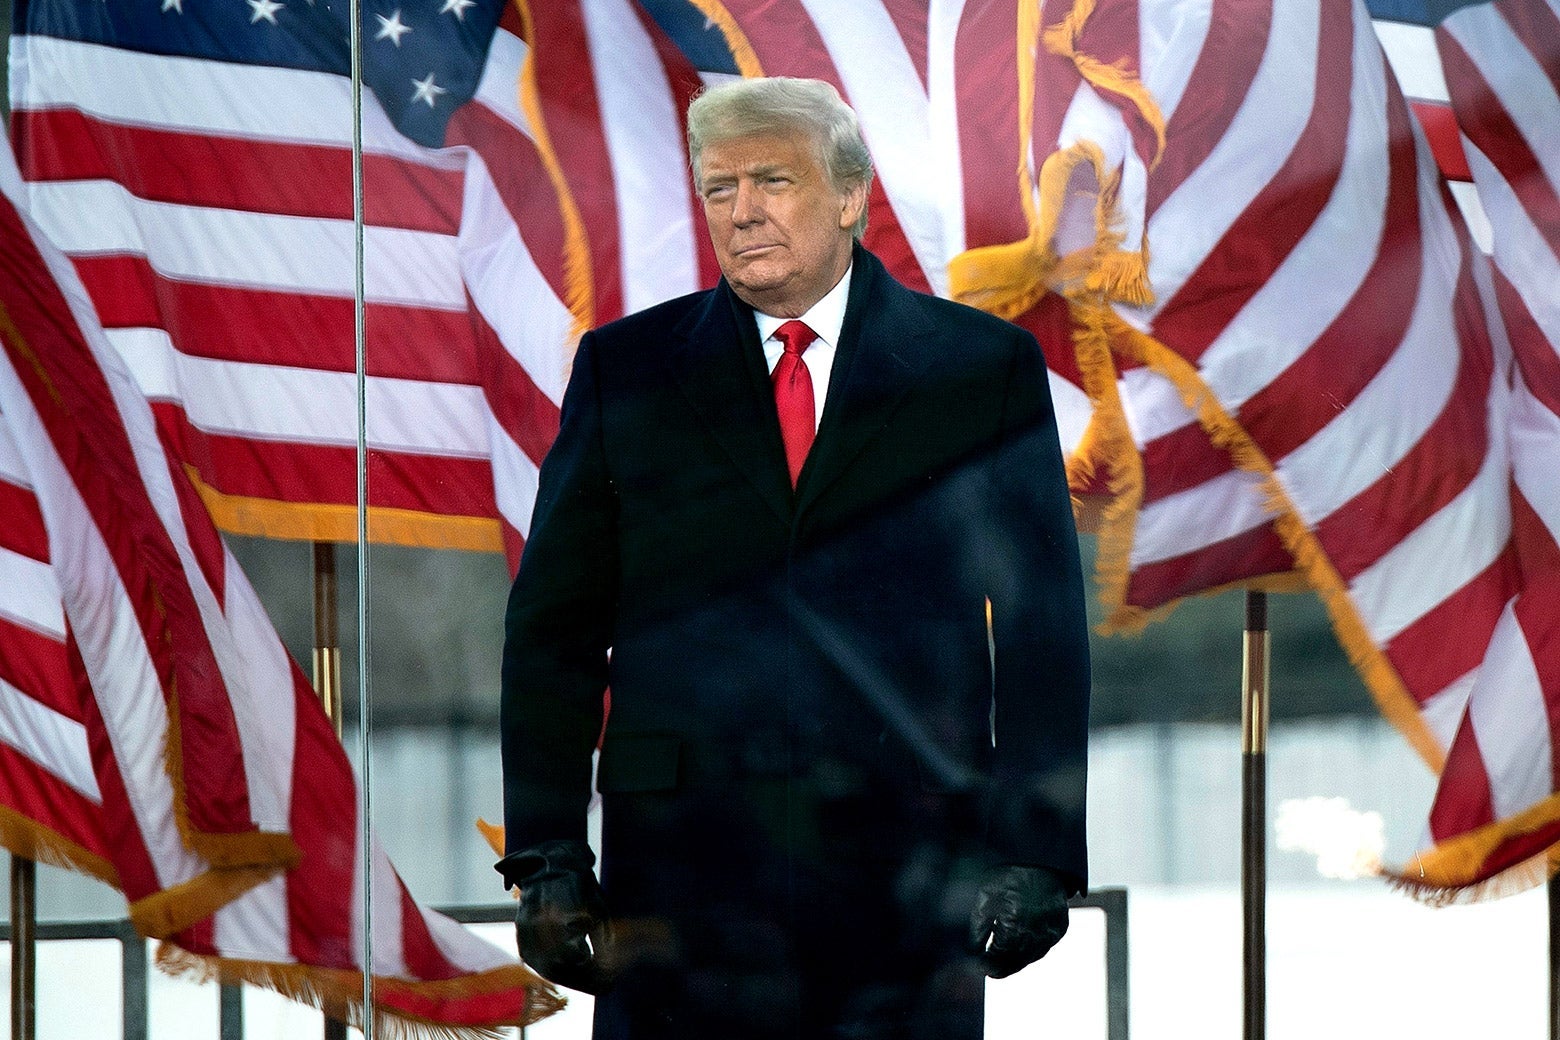 Donald Trump in front of the White House and several U.S. flags.